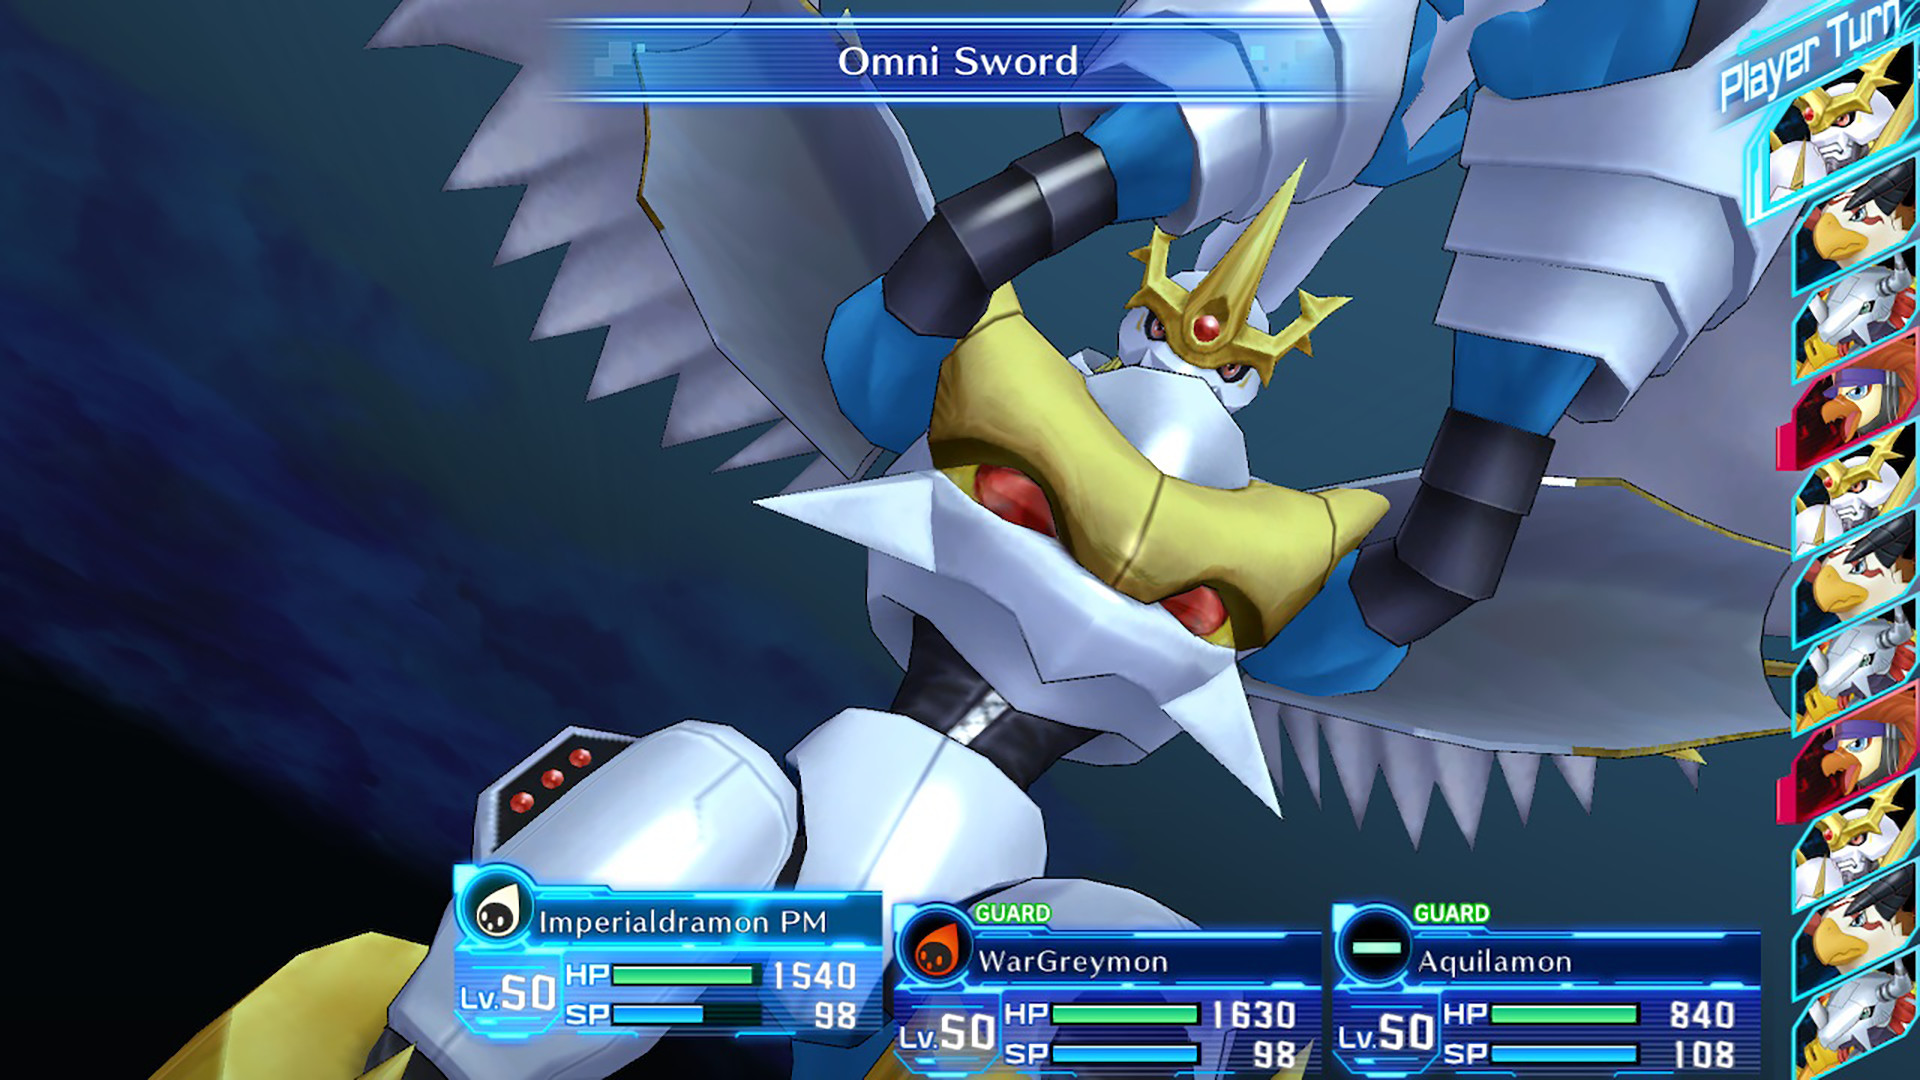 Digimon Story Cyber Sleuth: Complete Edition Free Download